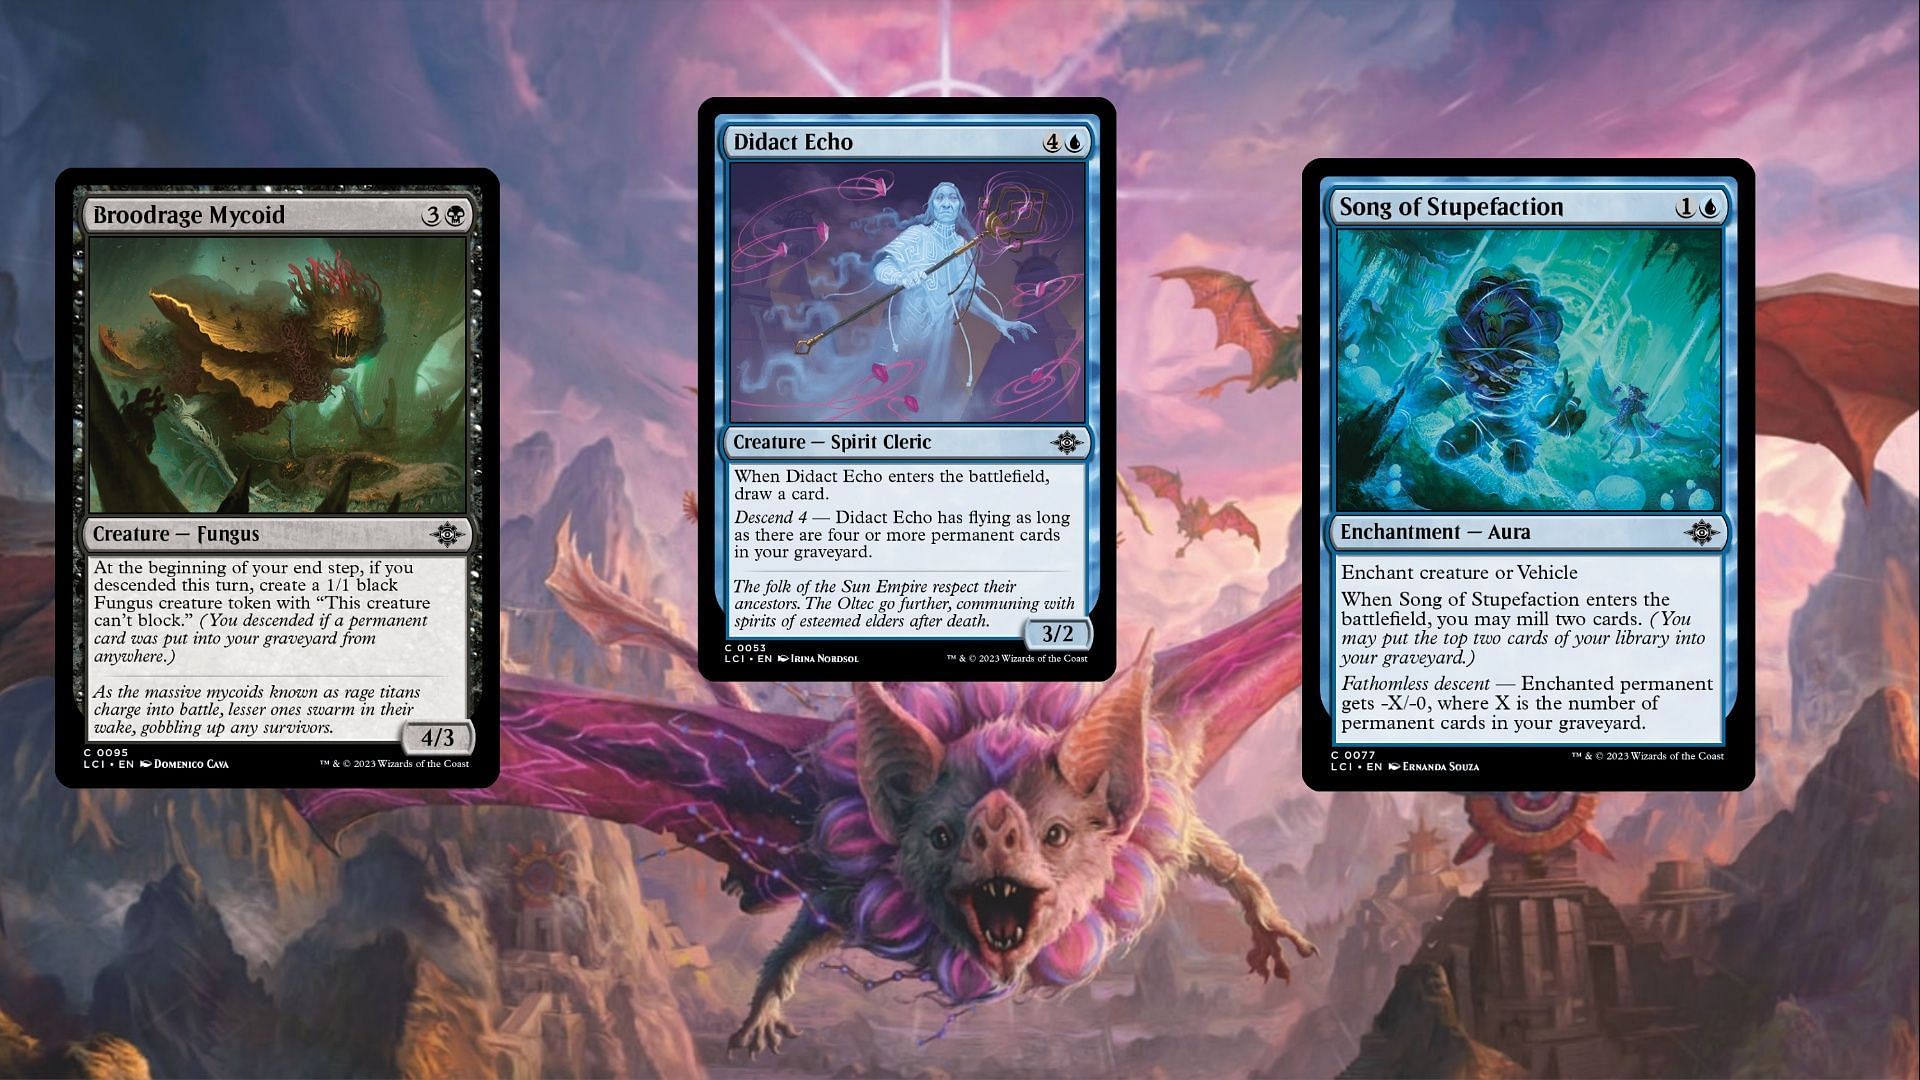 Broodrage Mycoid, Didact Echo, and Song of Stupefaction in MTG (Image via Wizards of the Coast)